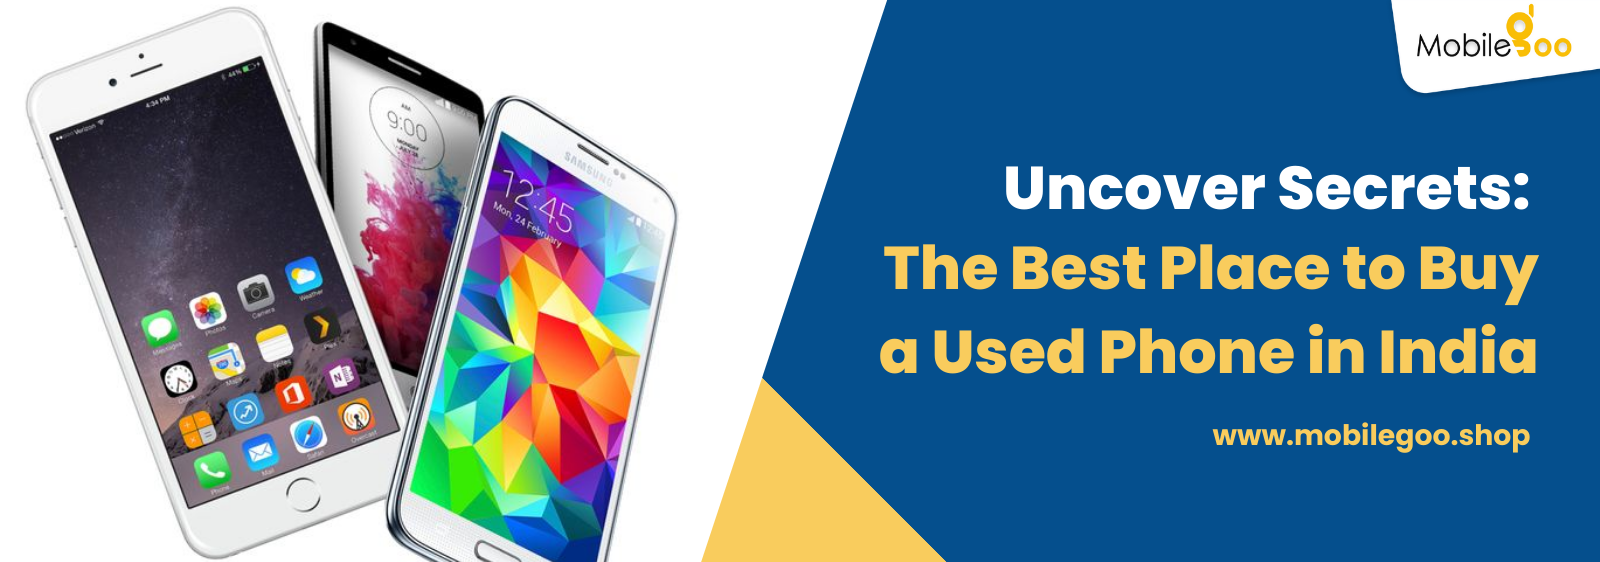 Uncover Secrets: The Best Place to Buy a Used Phone in India